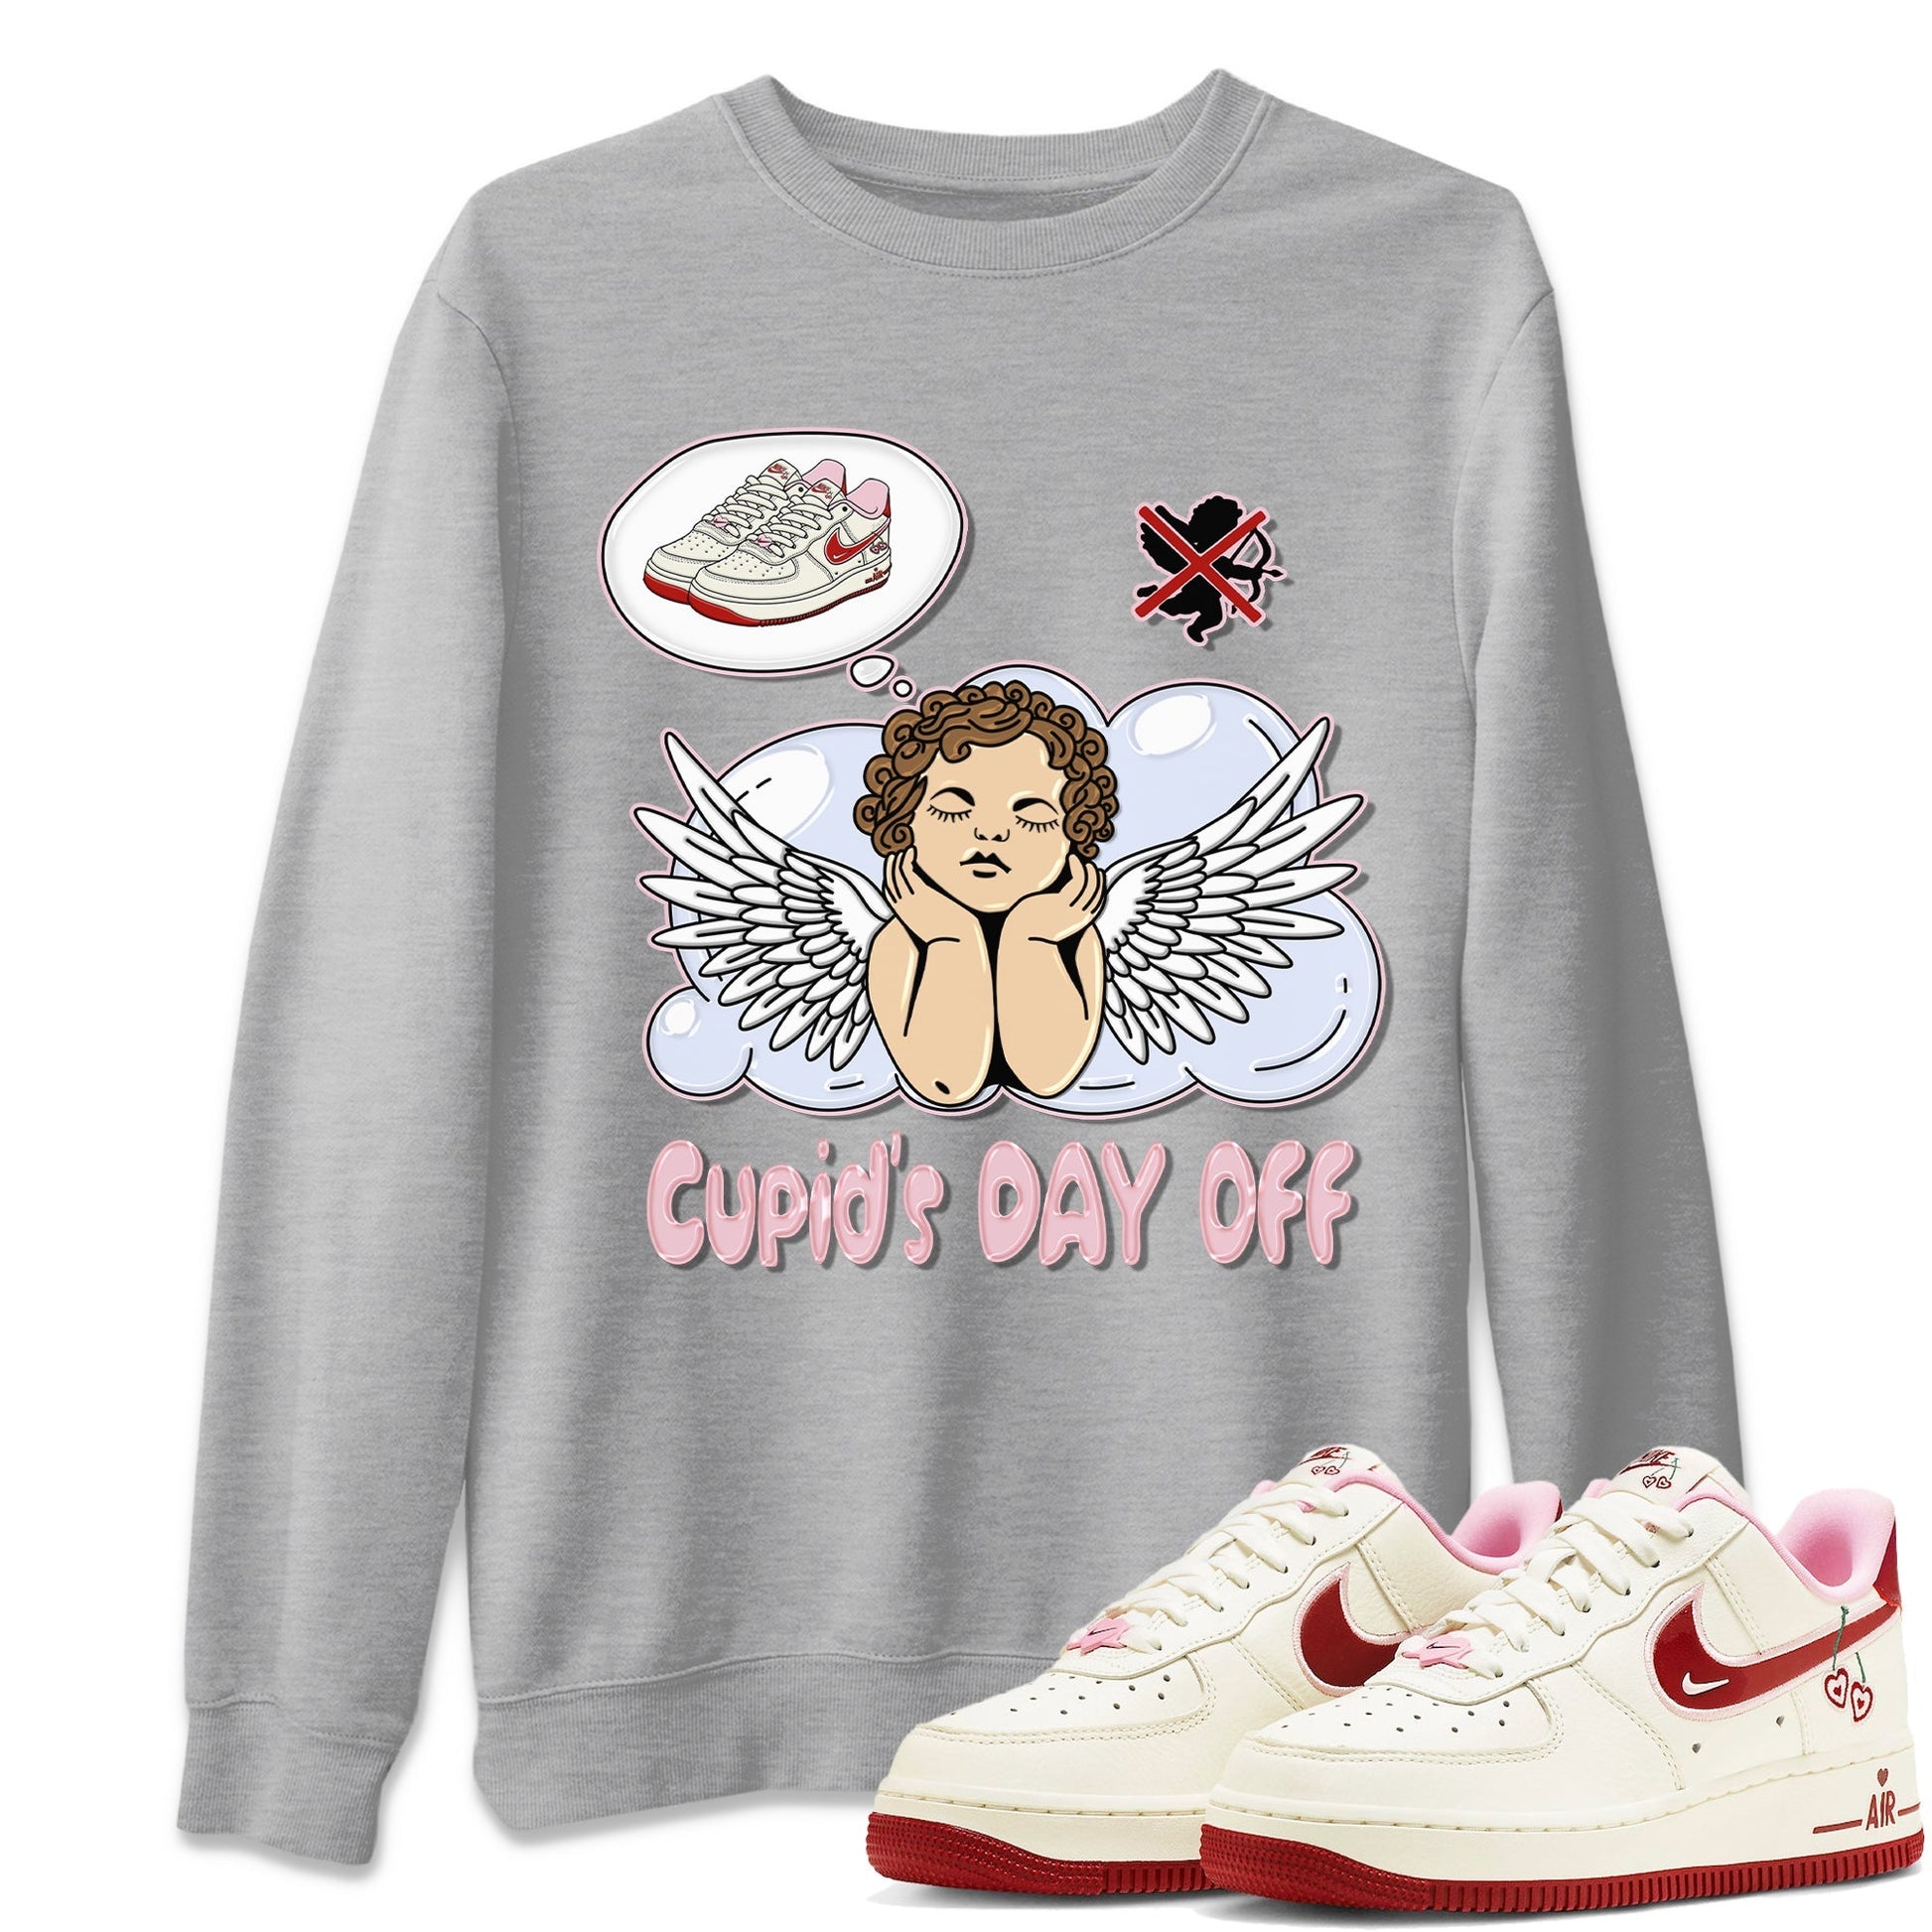 Air Force 1 Valentines Day Sneaker Match Tees Cupids Day Off Sneaker Tees Air Force 1 Valentines Day Sneaker Release Tees Unisex Shirts